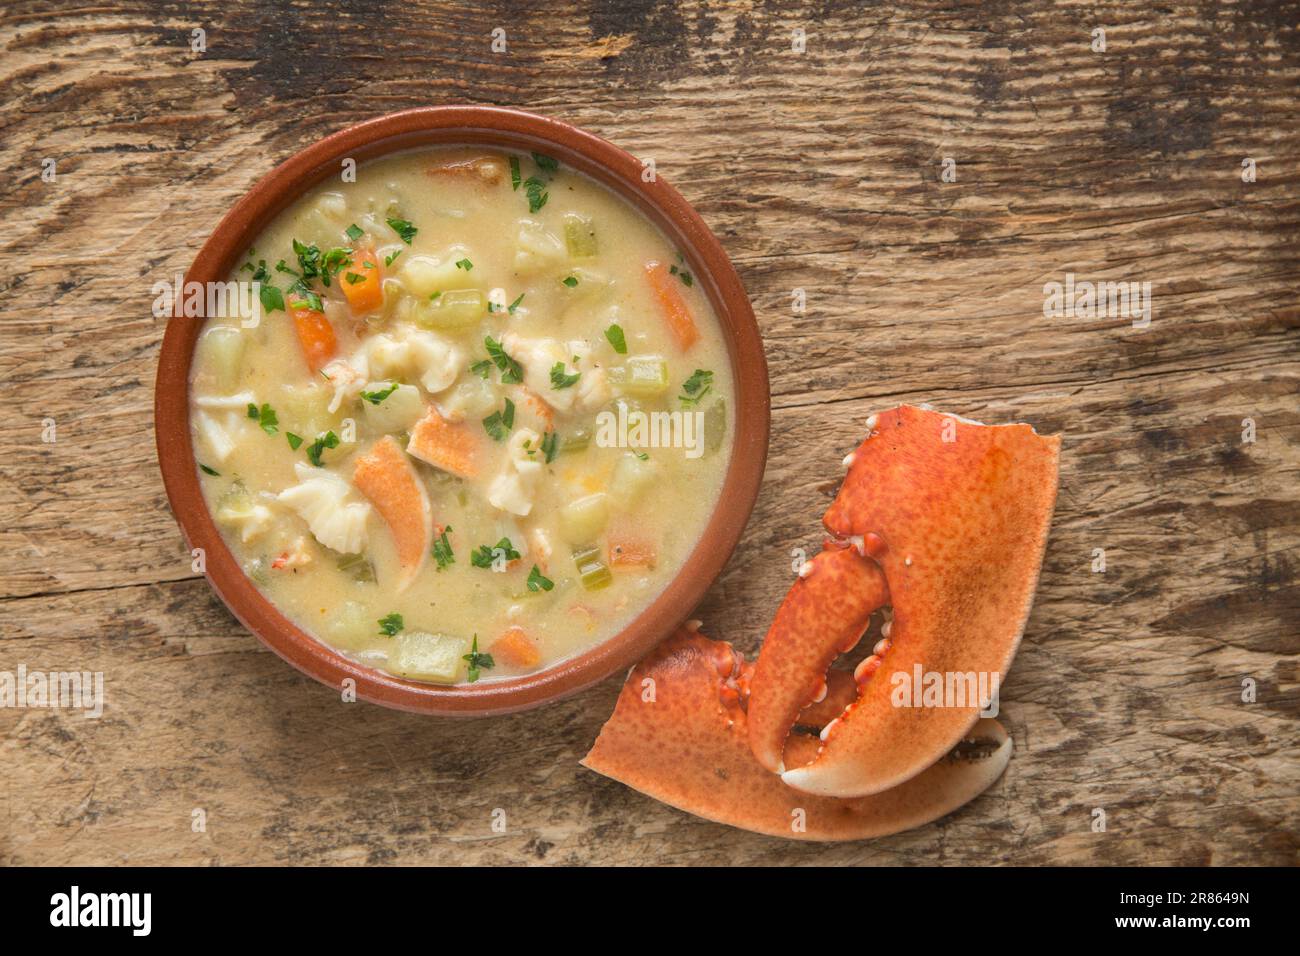 A lobster, Homarus gammarus, that has been caught in the English and homecooked in a chowder. Served in a bowl on a wooden board decorated with lobste Stock Photo